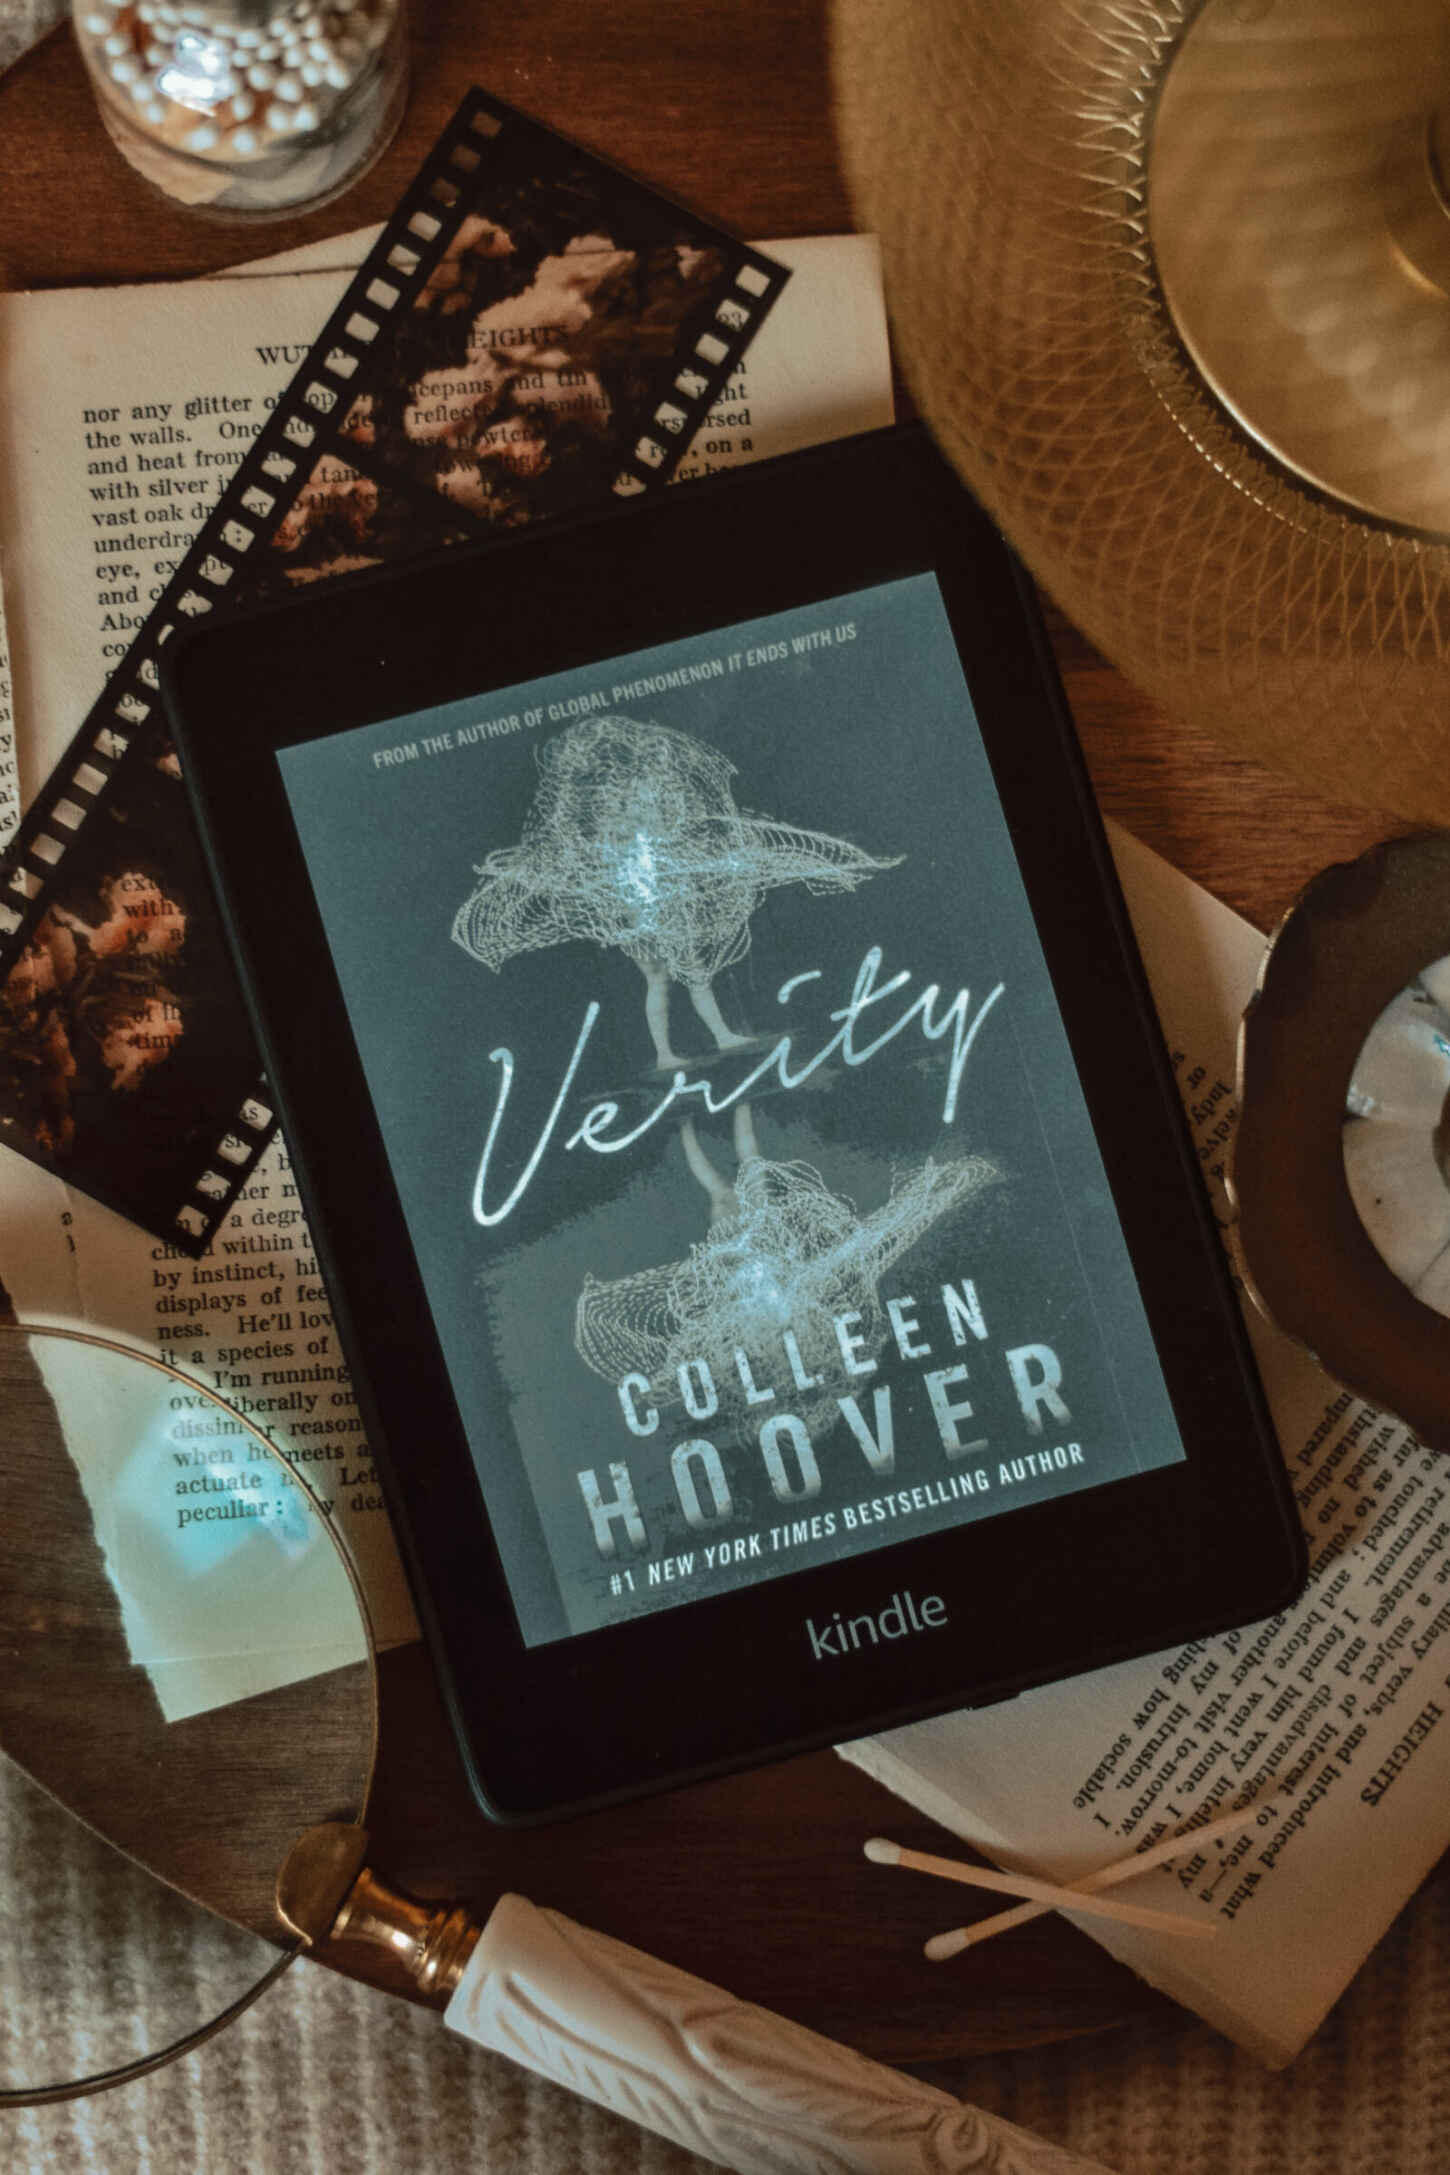 Verity by Colleen Hoover — A Gripping Psychological Thriller, by Starter_  Startler